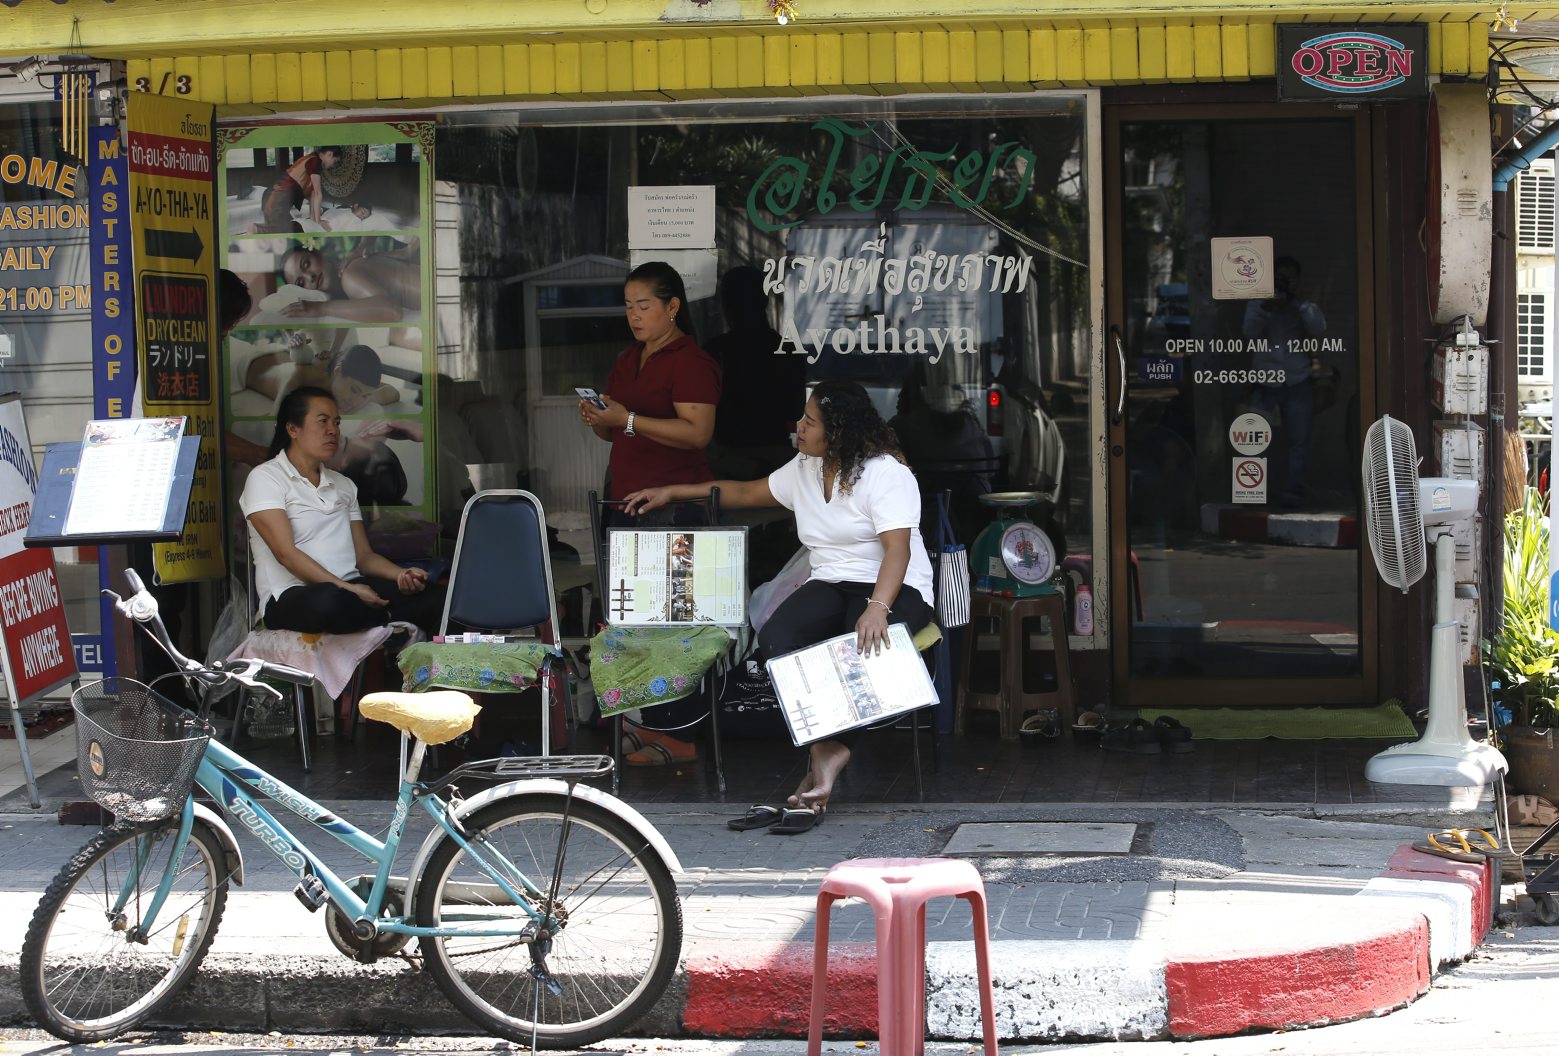 epa08280178 Thai masseuses wait for customer at a tourist spot in Bangkok, Thailand, 09 March 2020. Thailand's economy will grow less than one per cent as the country's tourism industry is hard hit impacted by the outbreak of the novel coronavirus or COVID-19. The deadly disease has turned some of Thailand's tourist attractions to empty places after a massive decline in tourists especially from China. The number of tourists visiting Thailand in February 2020 fell 44.3 per cent while visitors from China which mainly largest tourists drop 85.3 per cent caused by growing fears on the continuing spreading of the COVID-19 or coronavirus, according to the Tourism Authority of Thailand.  EPA/RUNGROJ YONGRIT THAILAND ECONOMY CORONAVIRUS